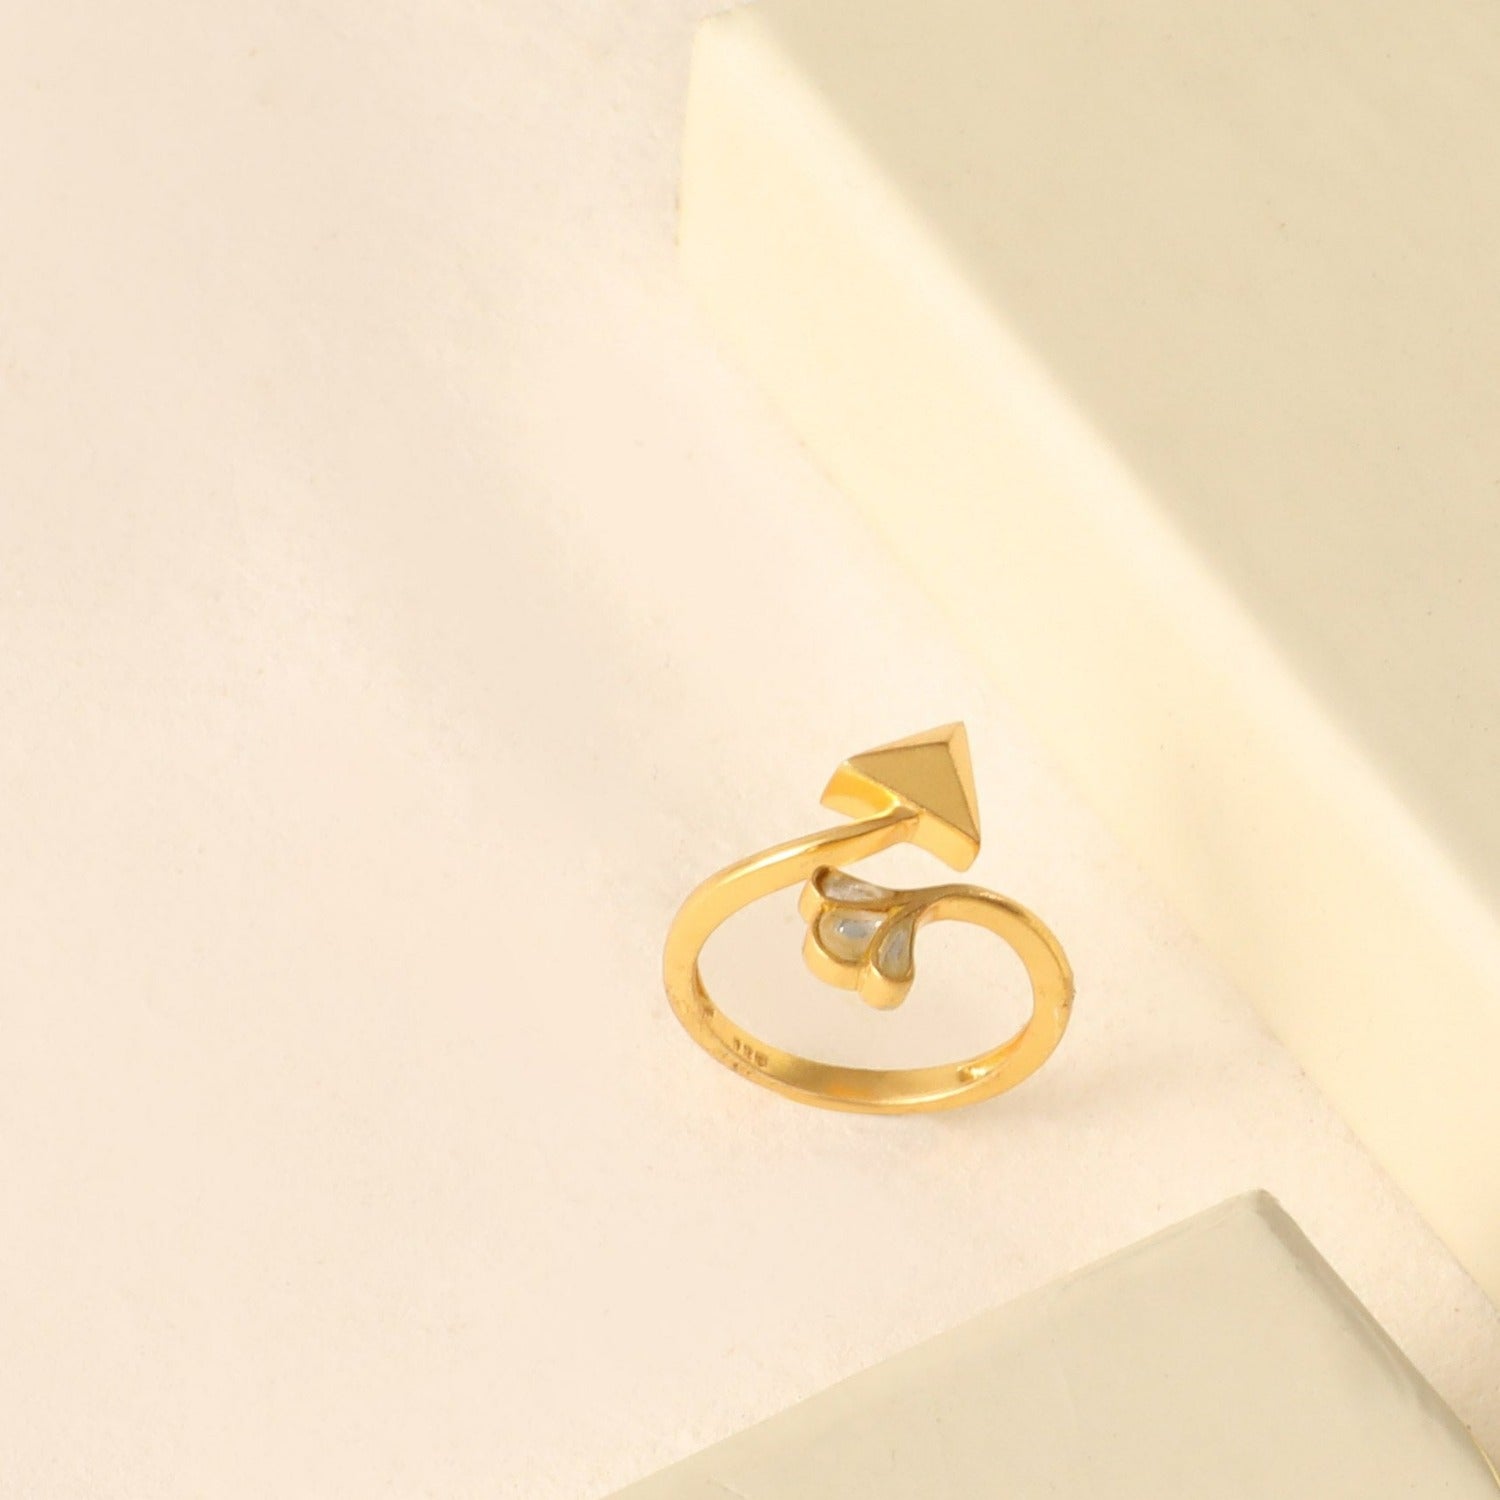 Manufacturer of 22kt gold plain casting s initial fitting gents ring |  Jewelxy - 103367